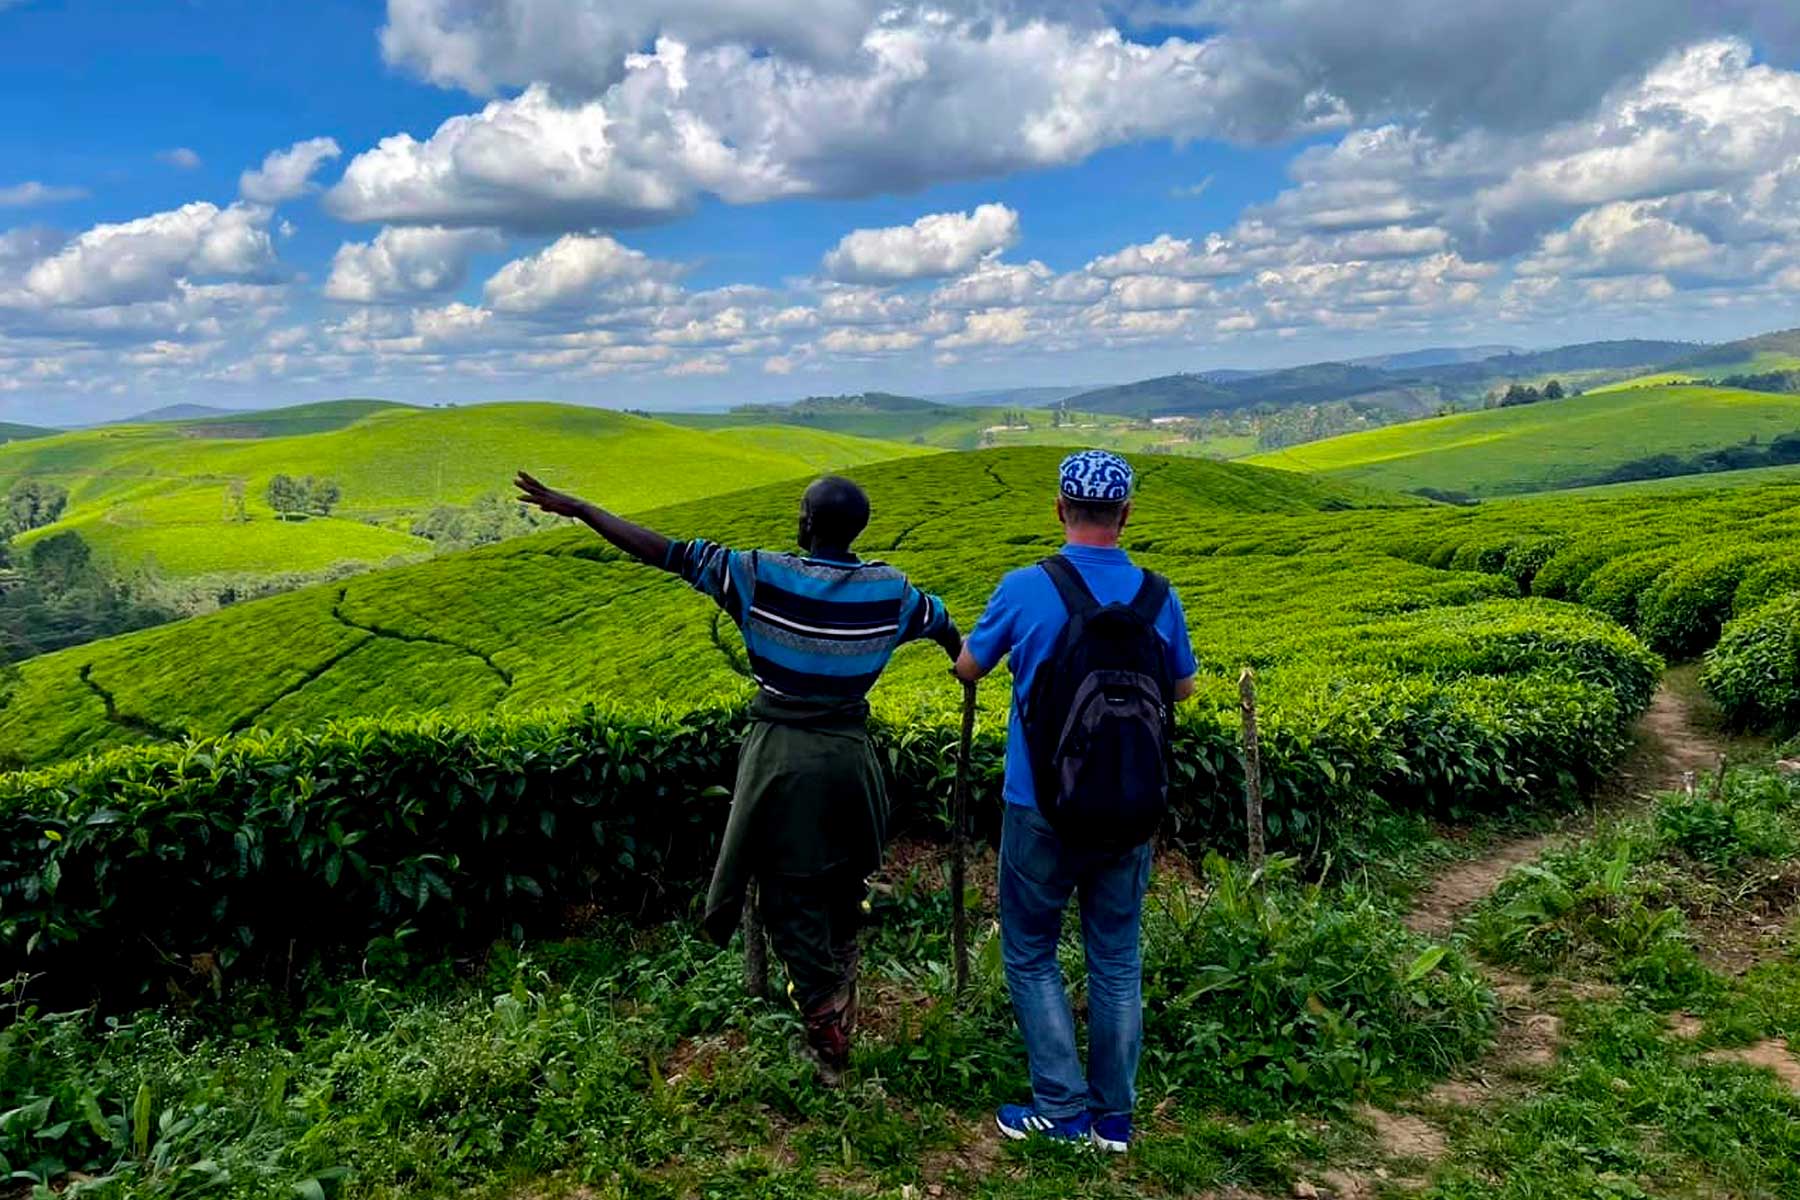 Tea Trails and Tours: Experiencing Tea Production from Farm to Cup